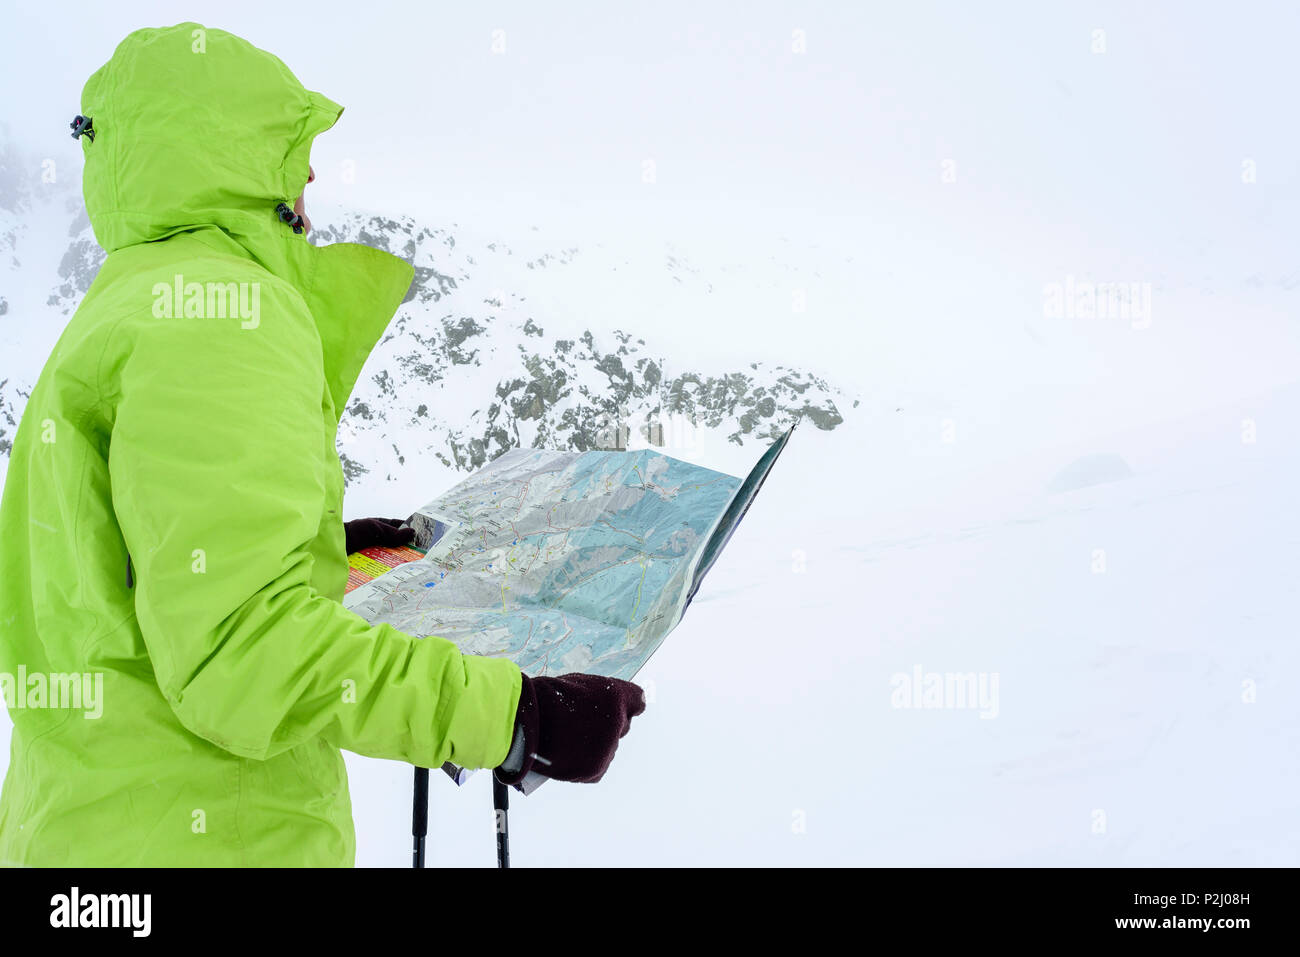 Woman back-country skiing studying map during bad weather, Serriera di Pignal, Valle Stura, Cottian Alps, Piedmont, Italy Stock Photo